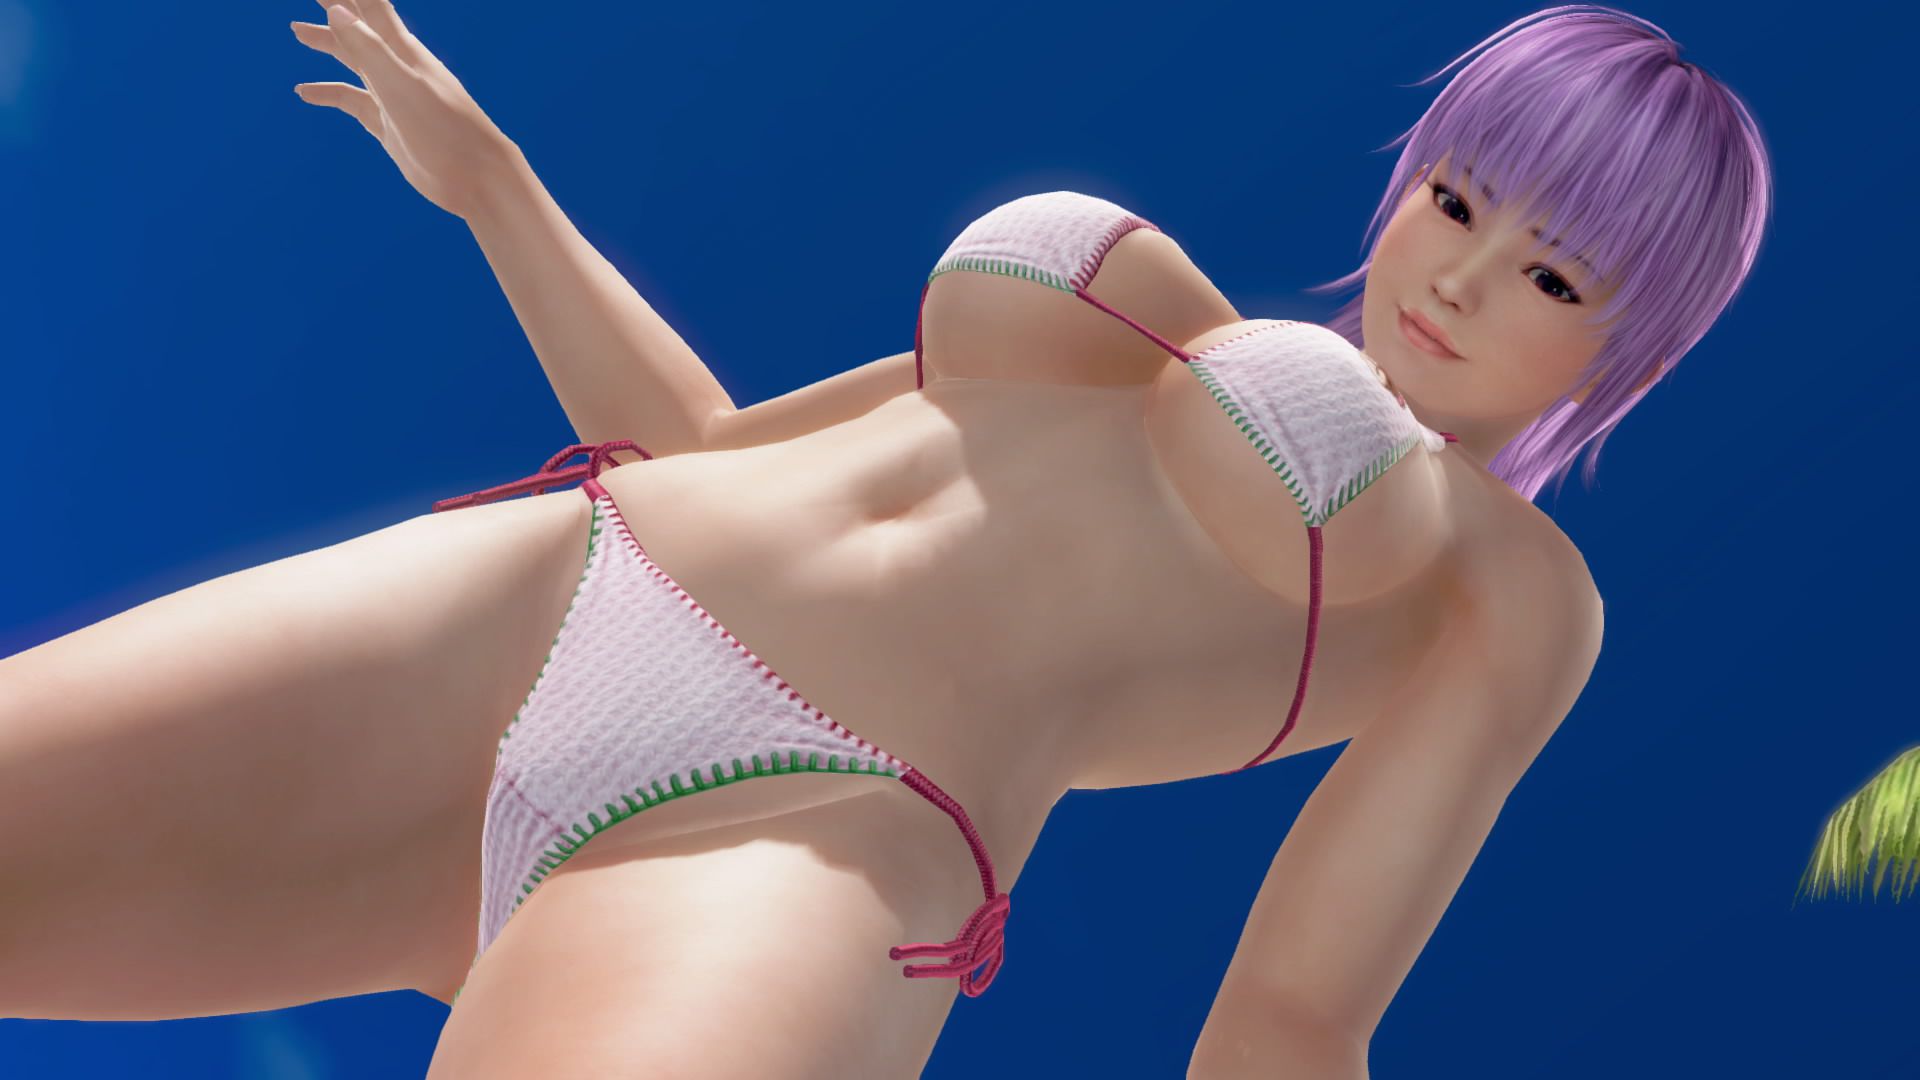 Doax3 "The color which suits the Aya-chan is pink" theory is verified 10